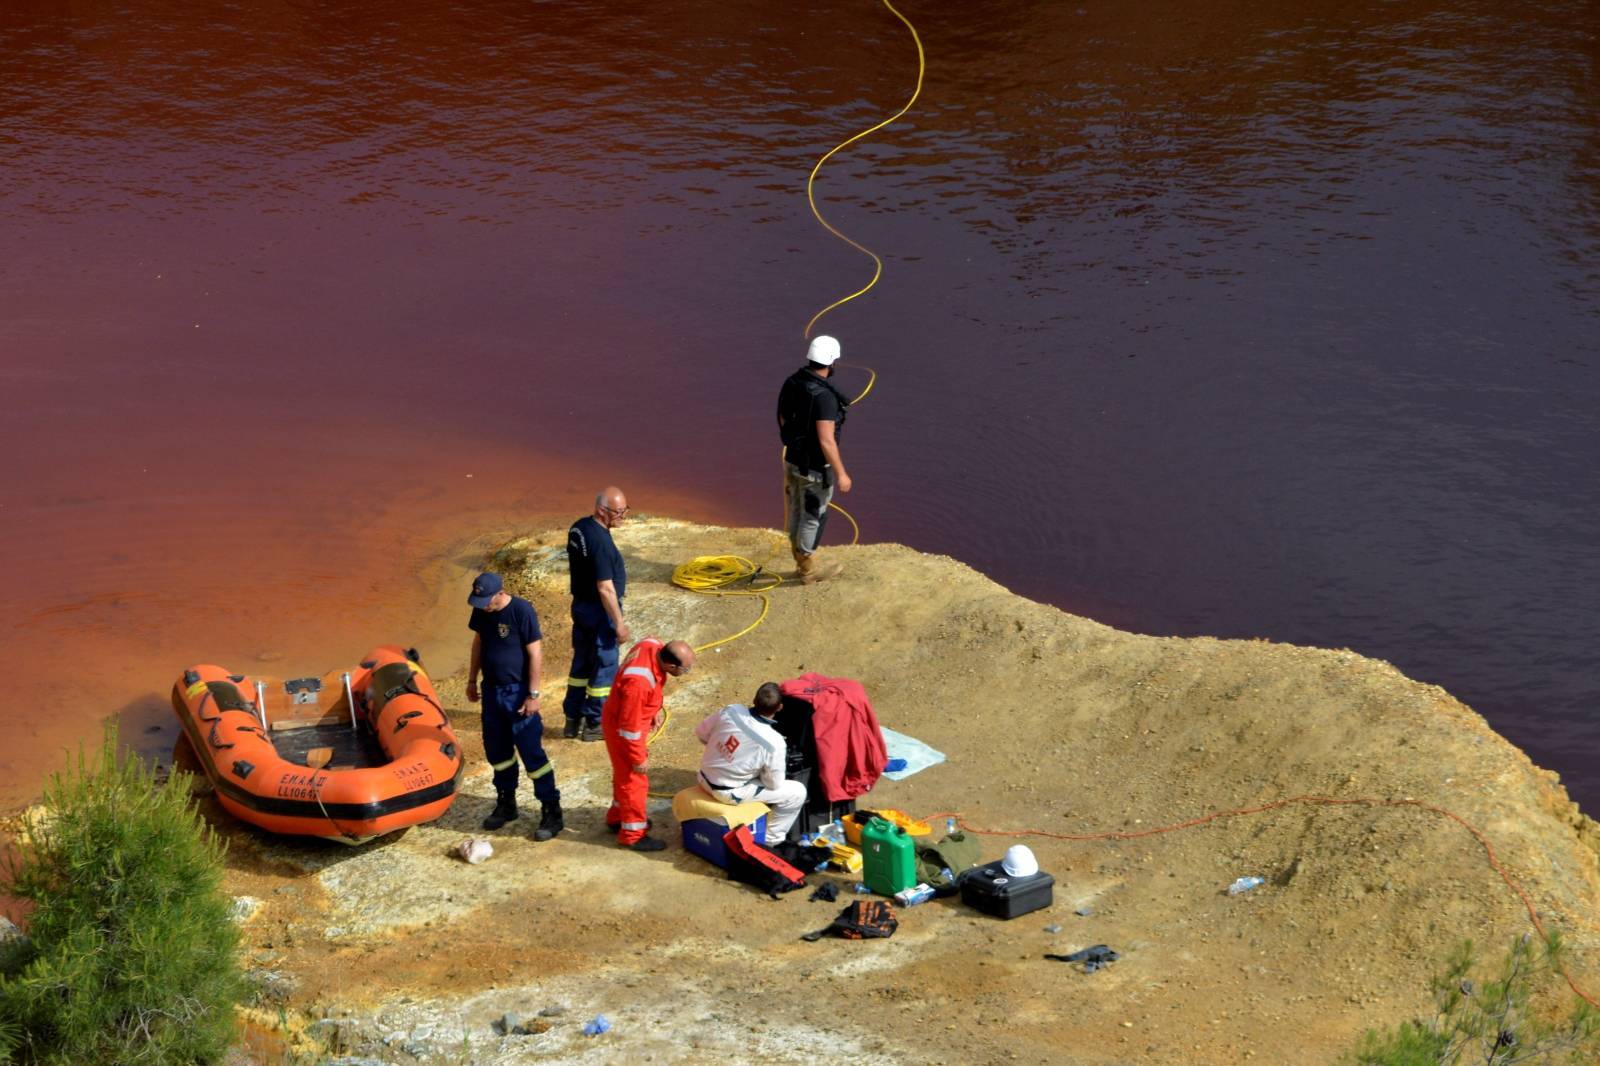 Forensics officers search Kokkinopezoula lake, also known as "red lake", for possible bodies of victims of a suspected serial killer near the village of Mitsero